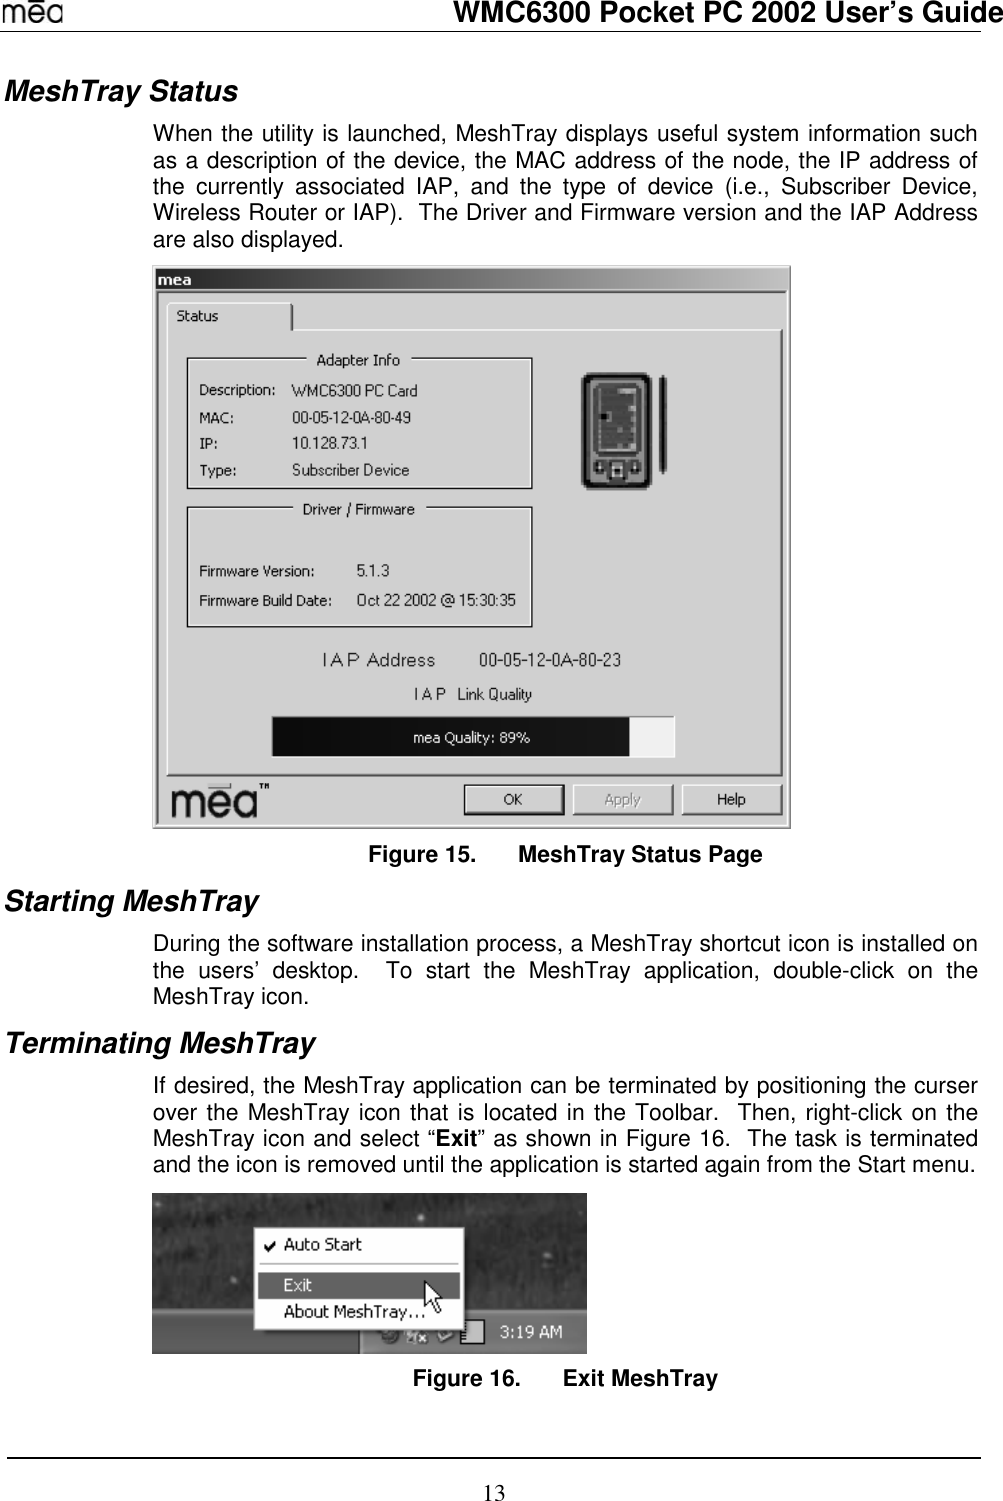   WMC6300 Pocket PC 2002 User’s Guide 13 MeshTray Status When the utility is launched, MeshTray displays useful system information such as a description of the device, the MAC address of the node, the IP address of the currently associated IAP, and the type of device (i.e., Subscriber Device, Wireless Router or IAP).  The Driver and Firmware version and the IAP Address are also displayed.    Figure 15.  MeshTray Status Page Starting MeshTray During the software installation process, a MeshTray shortcut icon is installed on the users’ desktop.  To start the MeshTray application, double-click on the MeshTray icon. Terminating MeshTray If desired, the MeshTray application can be terminated by positioning the curser over the MeshTray icon that is located in the Toolbar.  Then, right-click on the MeshTray icon and select “Exit” as shown in Figure 16.  The task is terminated and the icon is removed until the application is started again from the Start menu.  Figure 16.  Exit MeshTray 